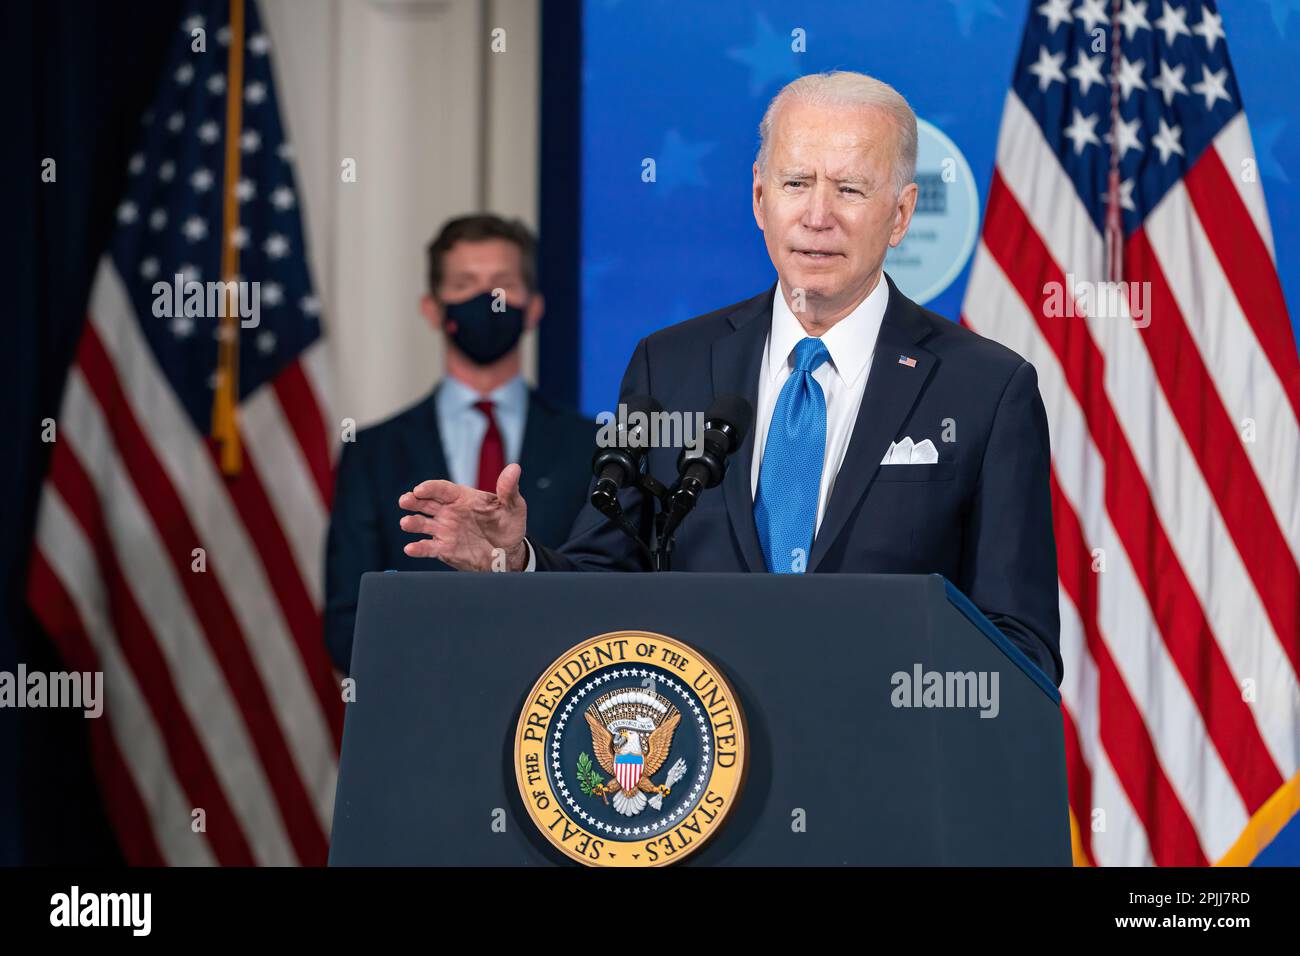 Johnson & Johnson CEO Alex Gorsky looks on as President Joe Biden delivers remarks on COVID-19 vaccine production Wednesday, March 10, 2021, in the South Court Auditorium in the Eisenhower Executive Office Building at the White House. (Official White House Photo by Adam Schultz) Stock Photo